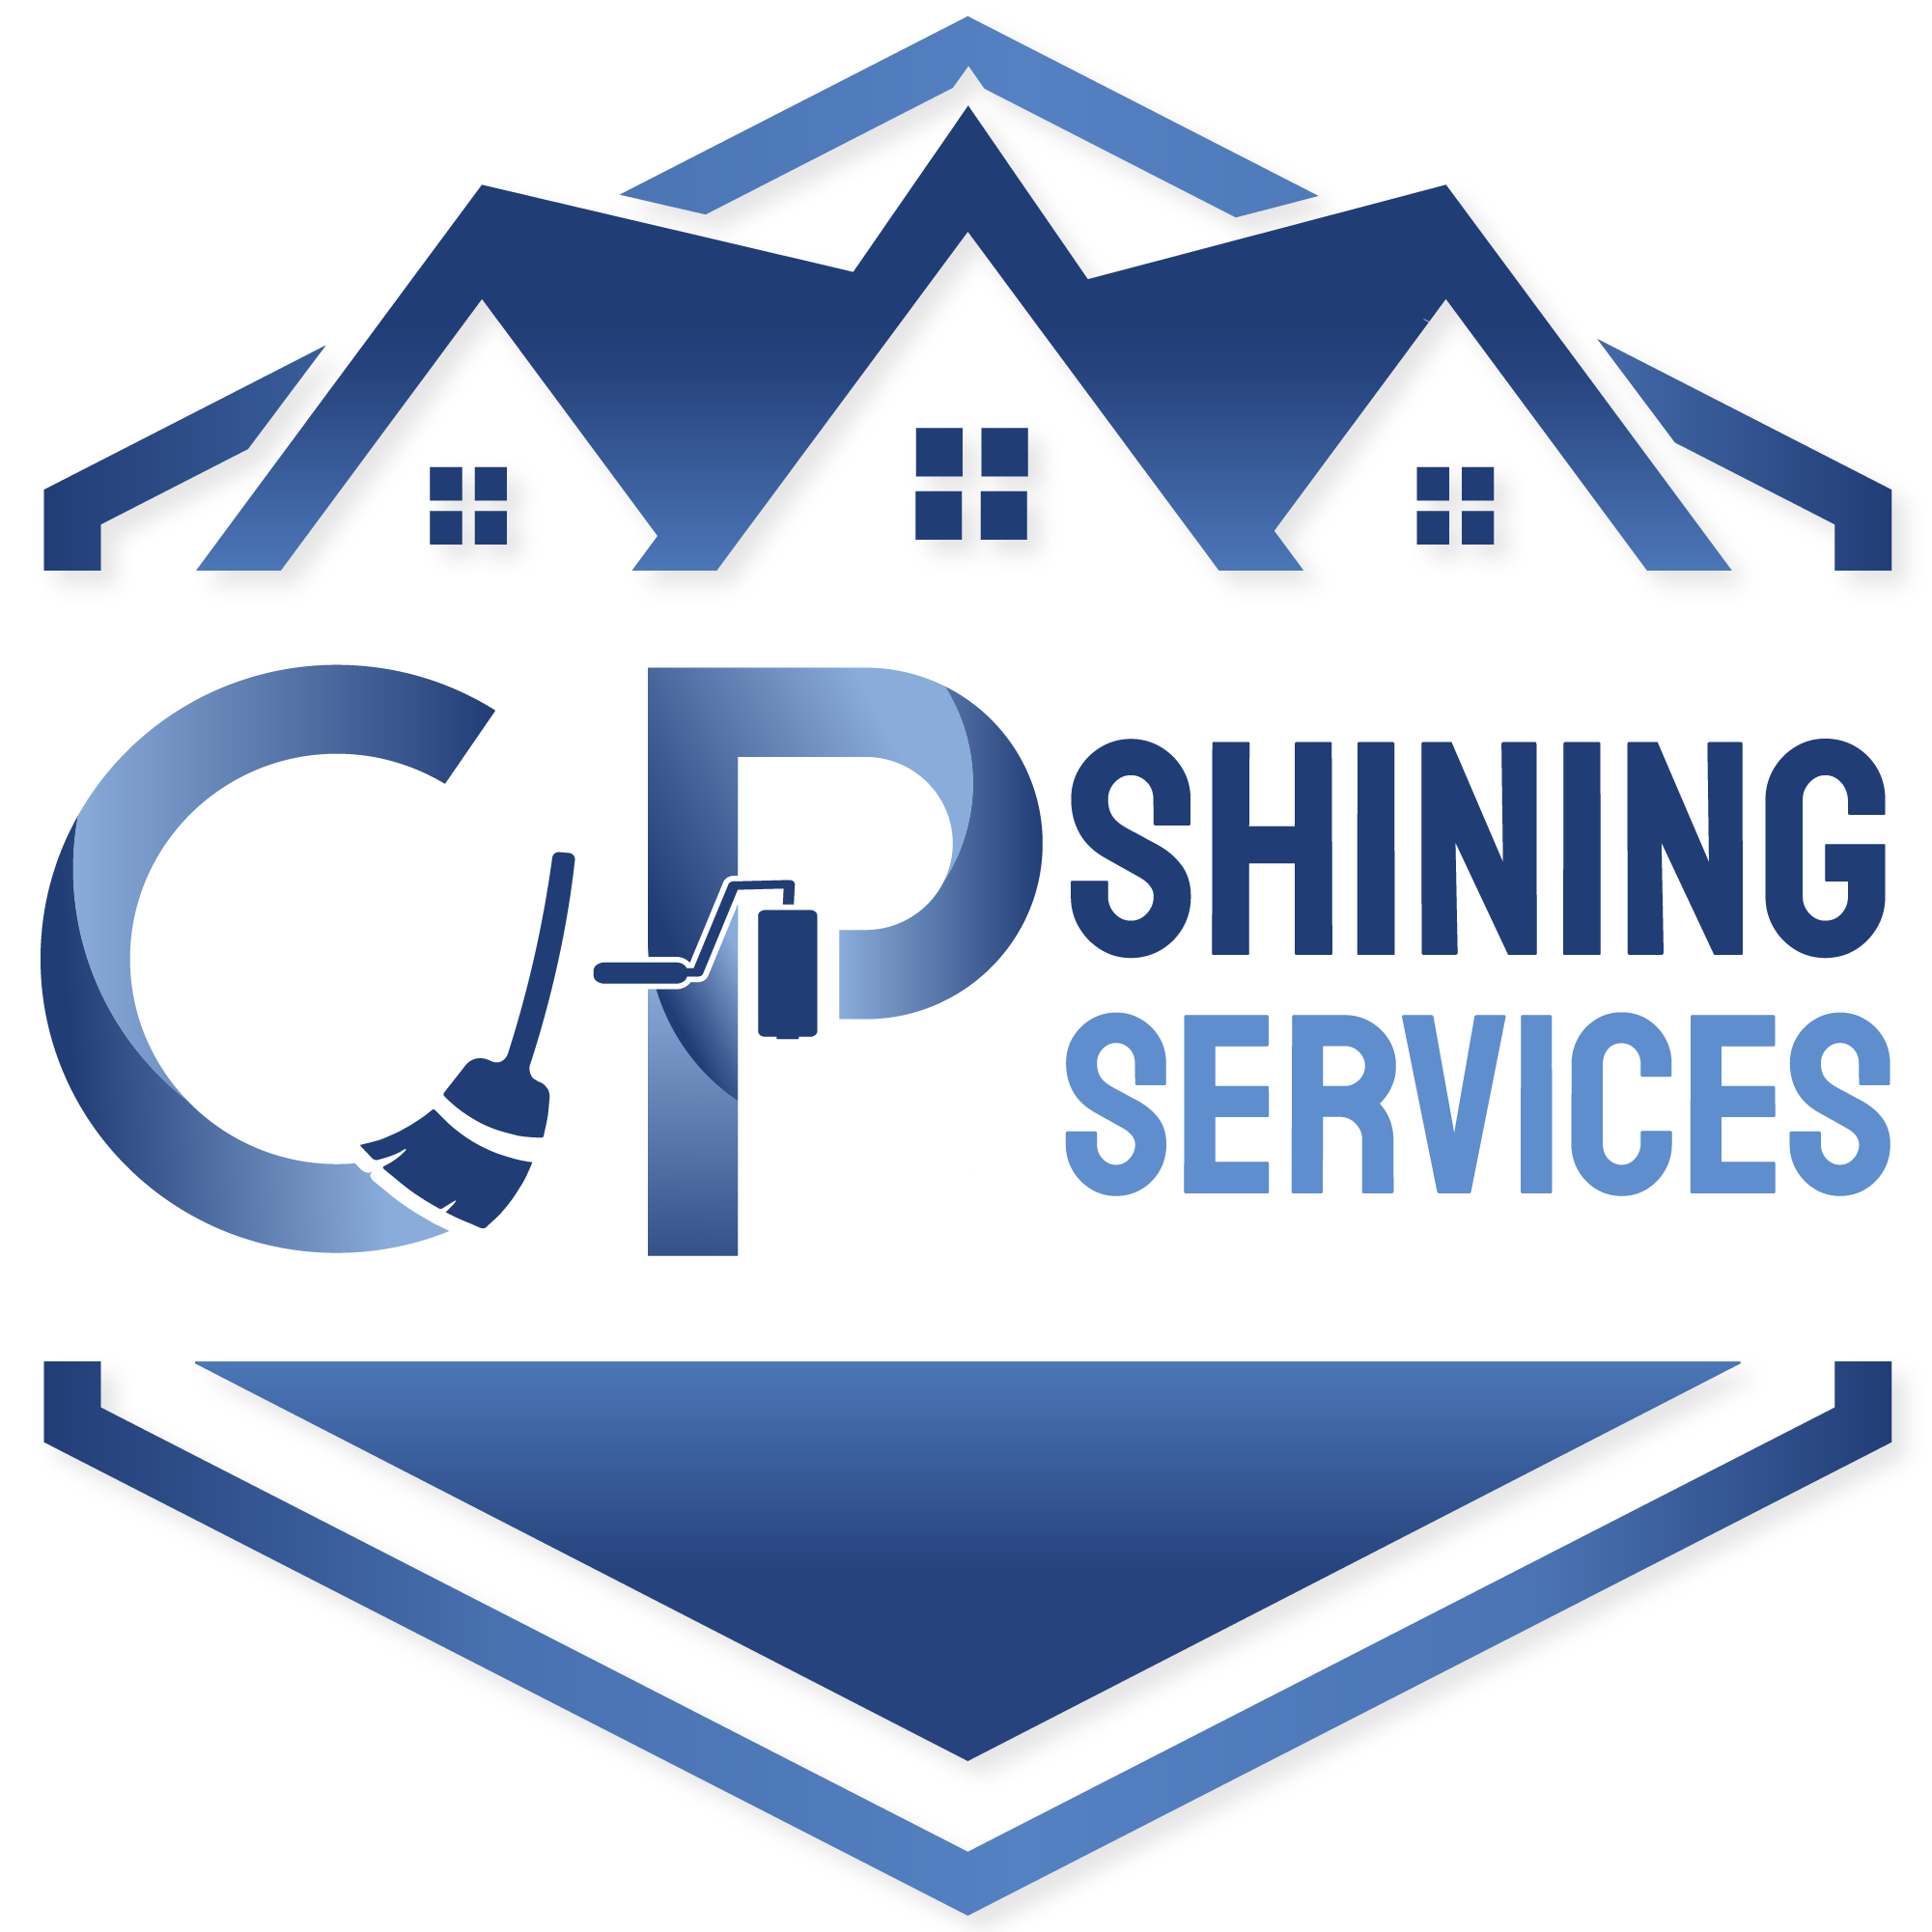 CP Shining Services